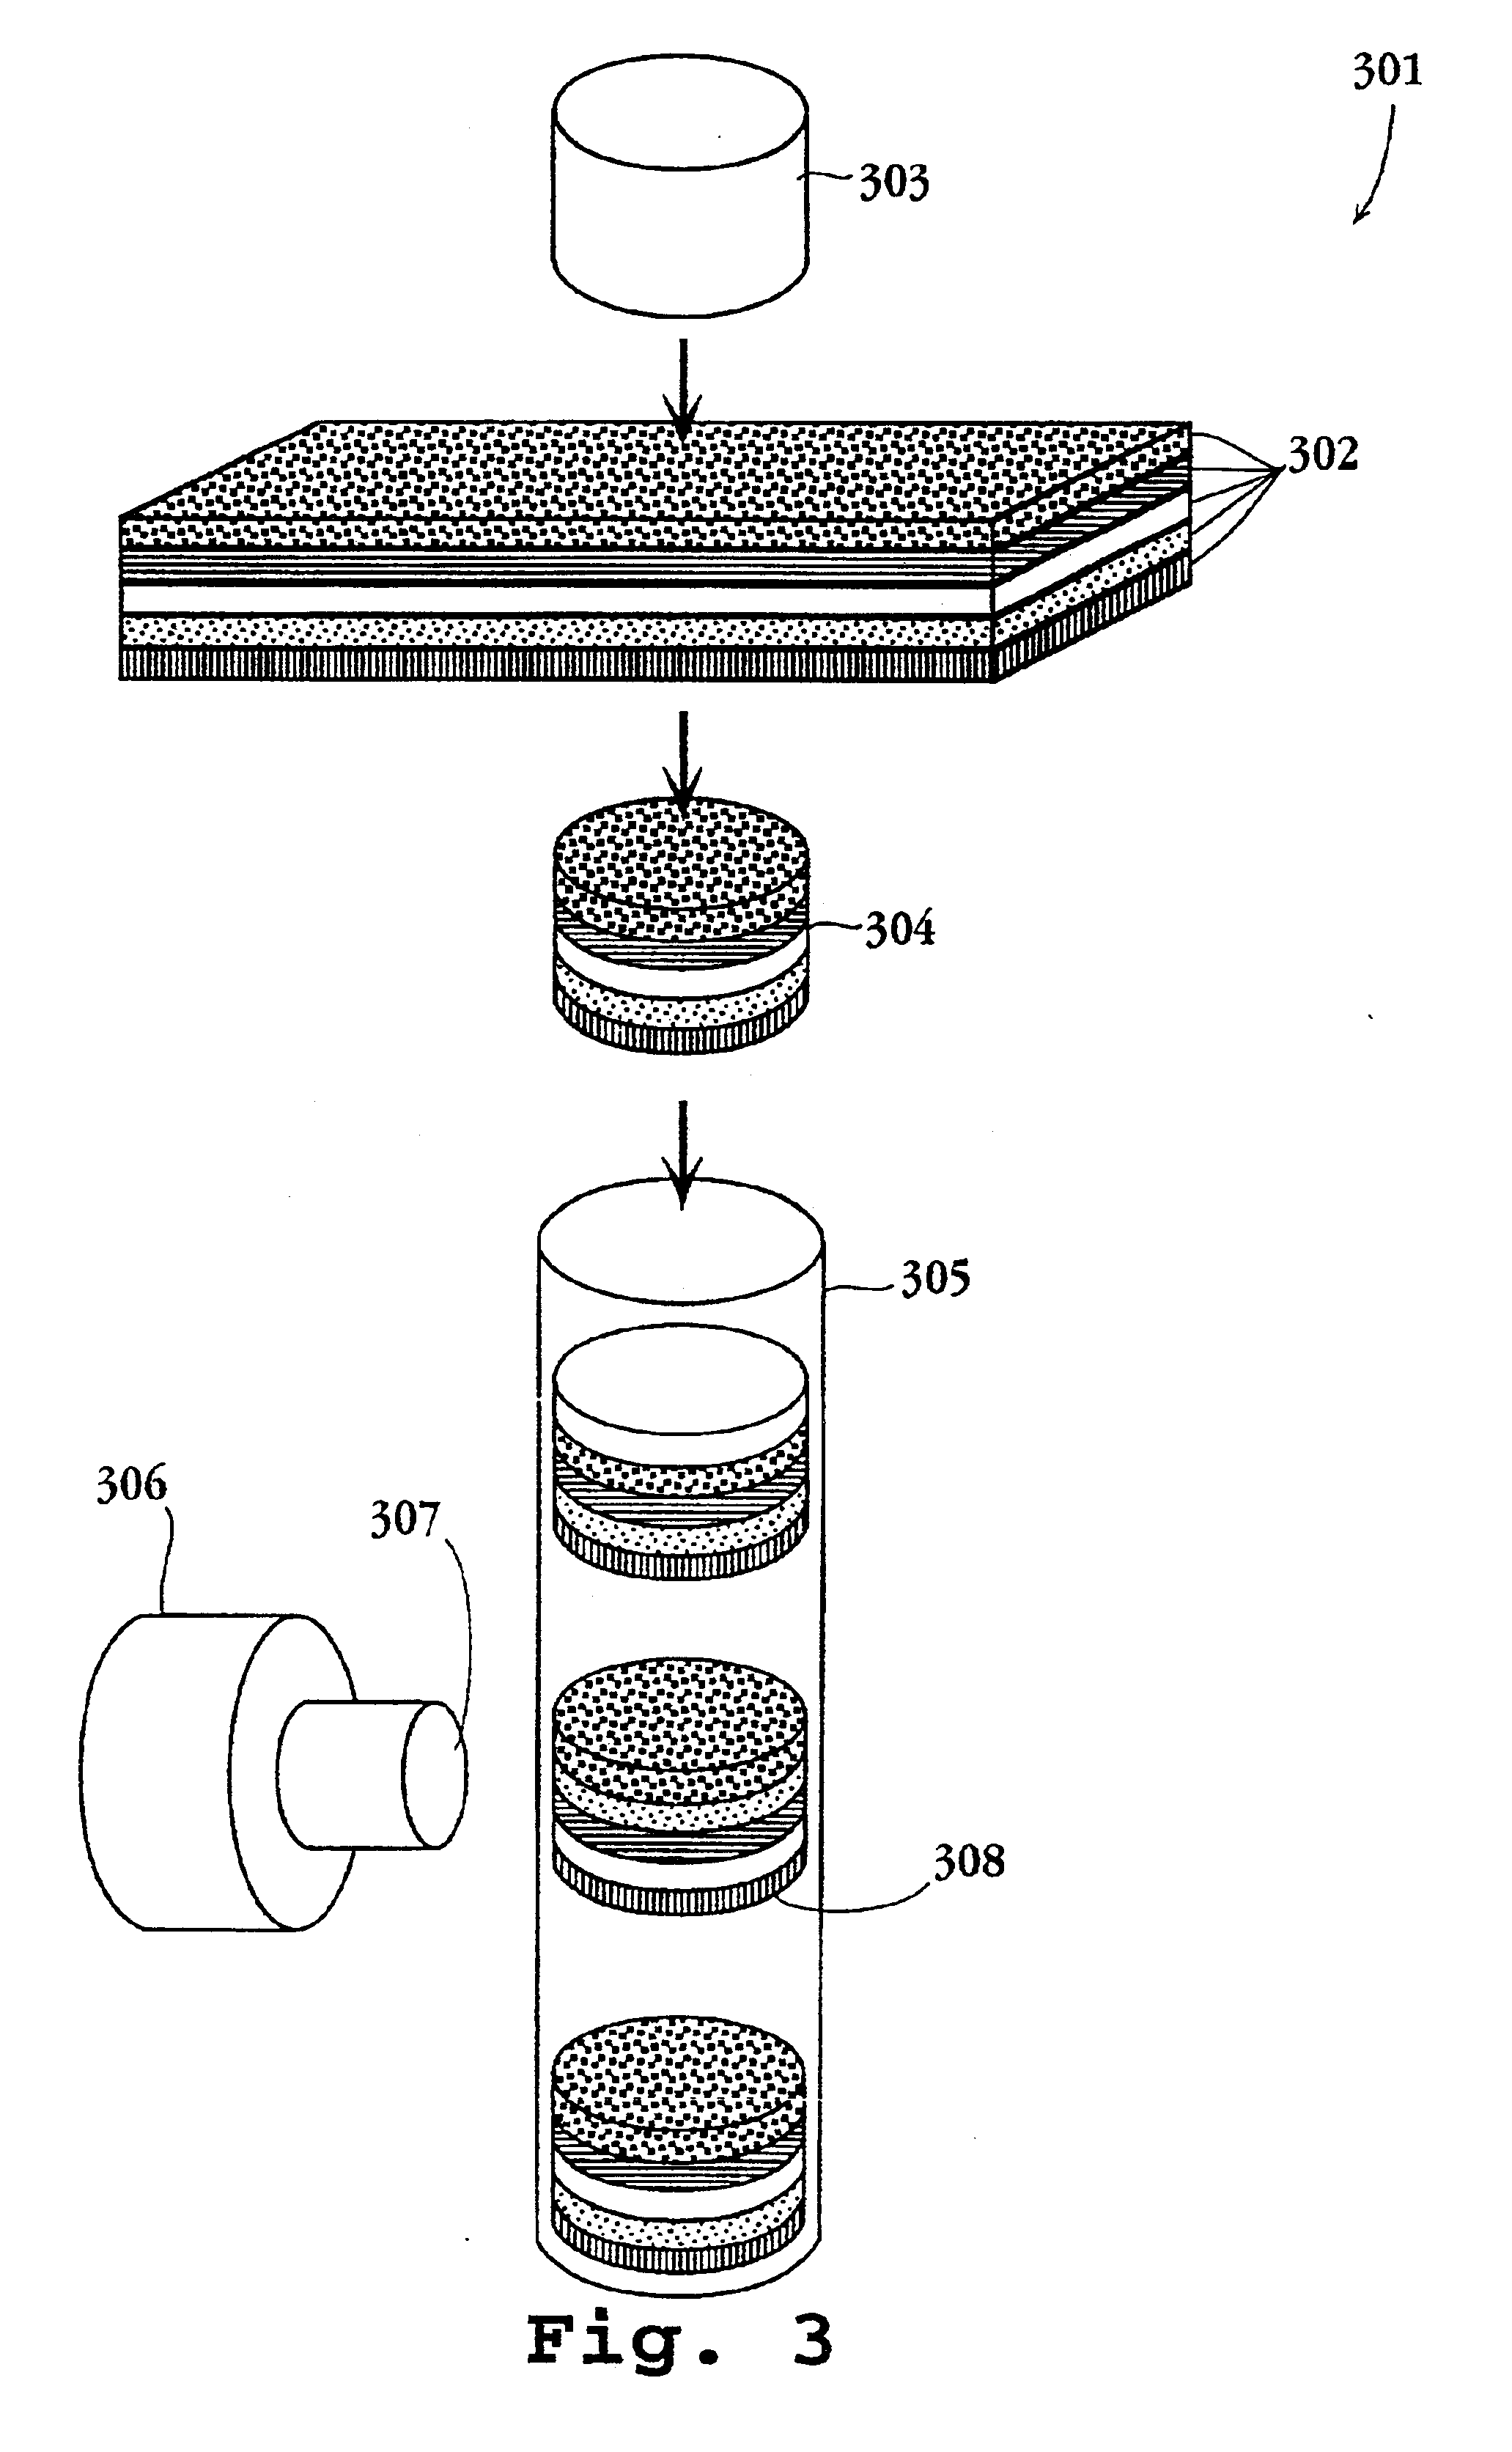 Systems and methods of conducting multiplexed experiments